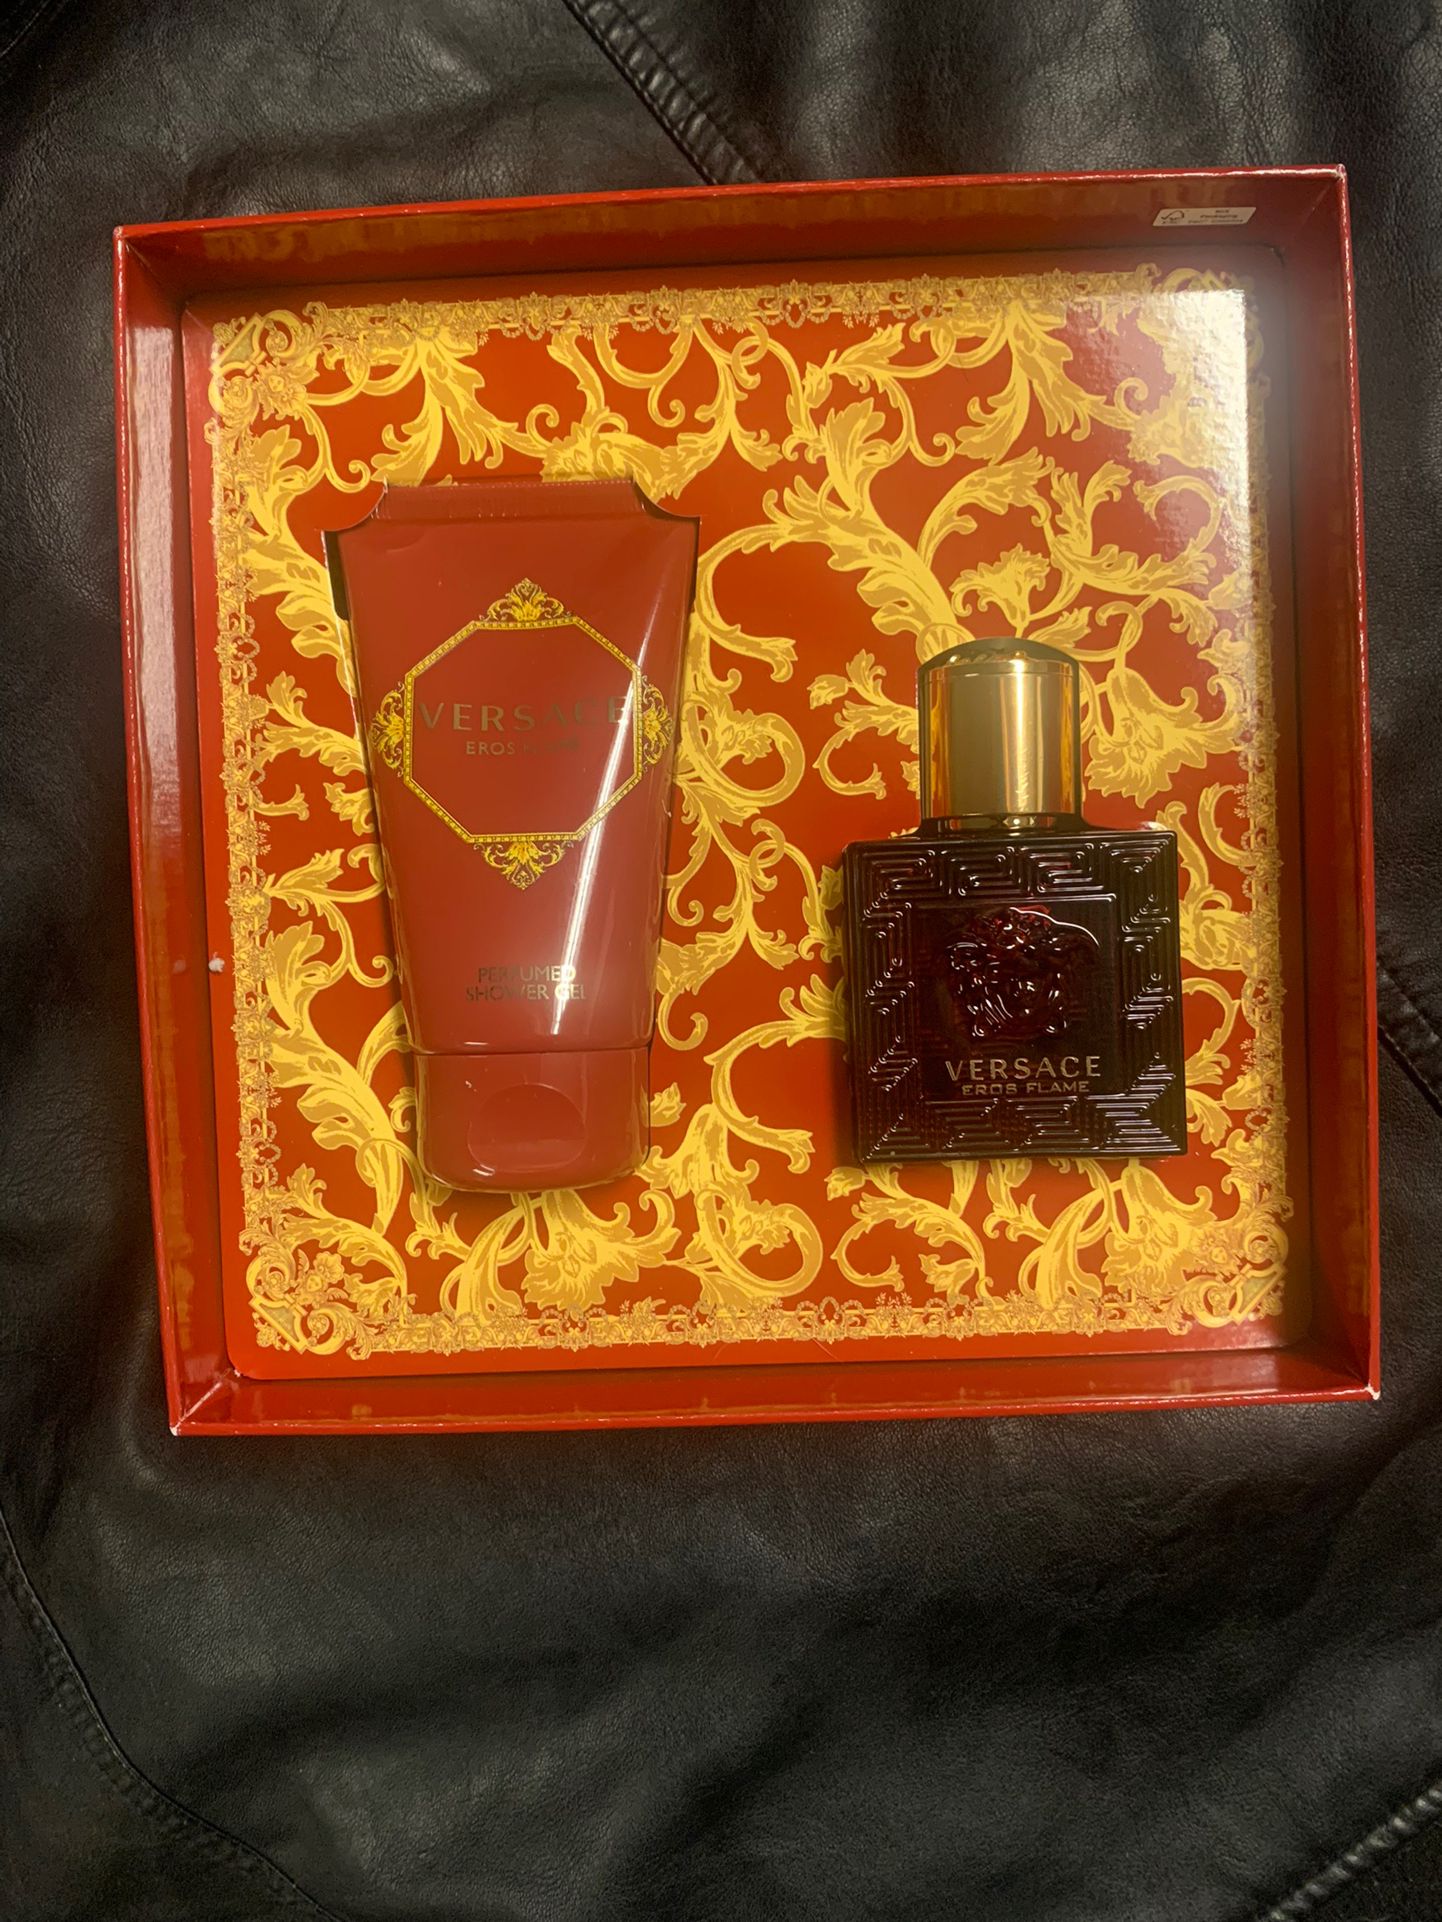 Versace Men Cologne 2pc Gift Set in Eros Flame (cologne & body wash)